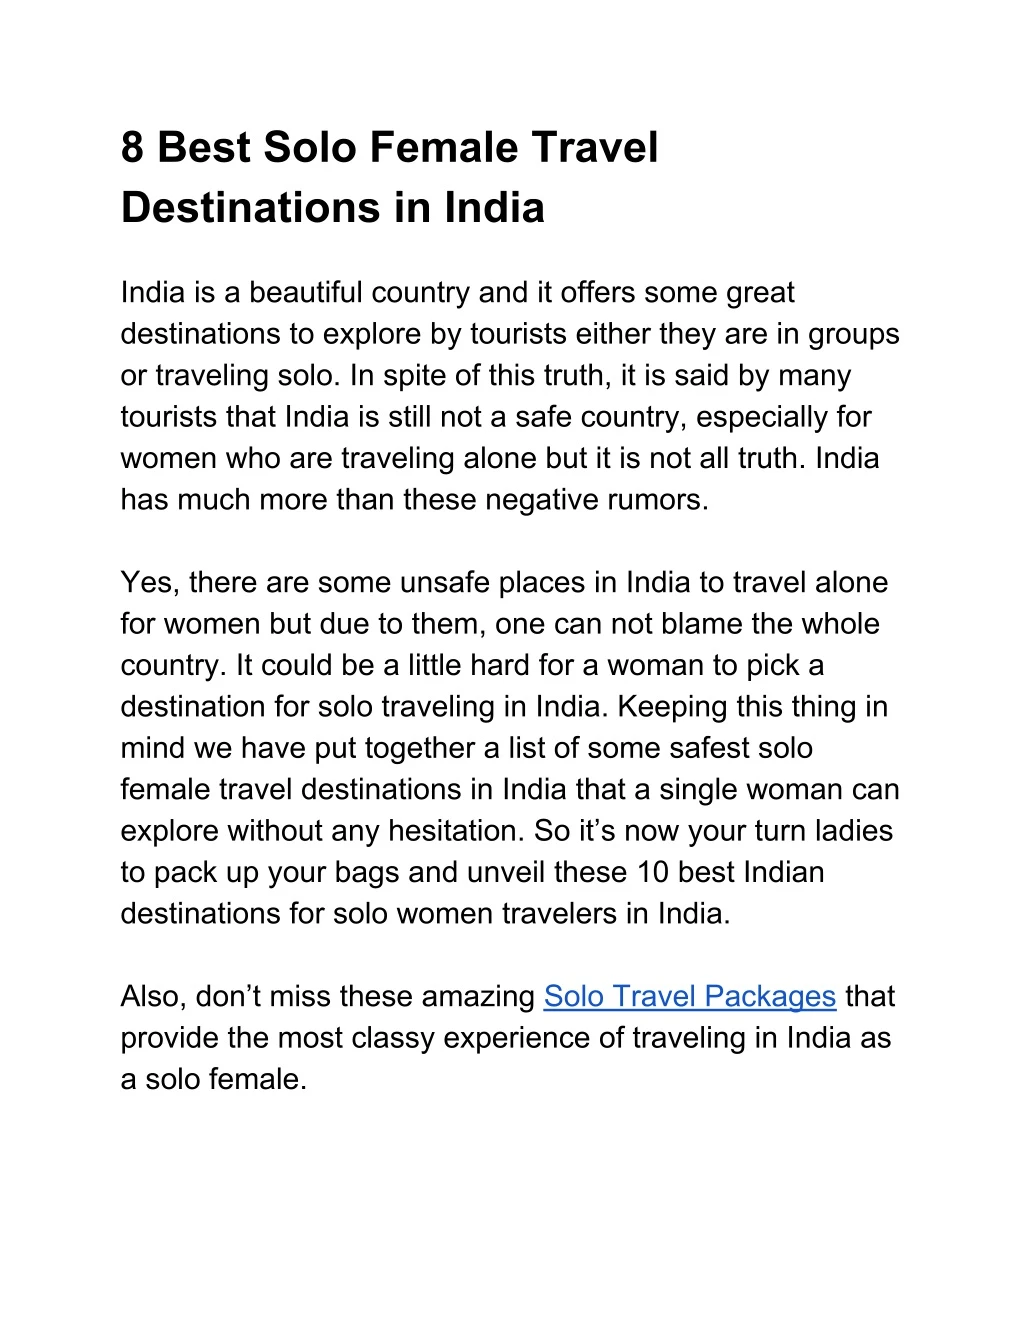 8 best solo female travel destinations in india